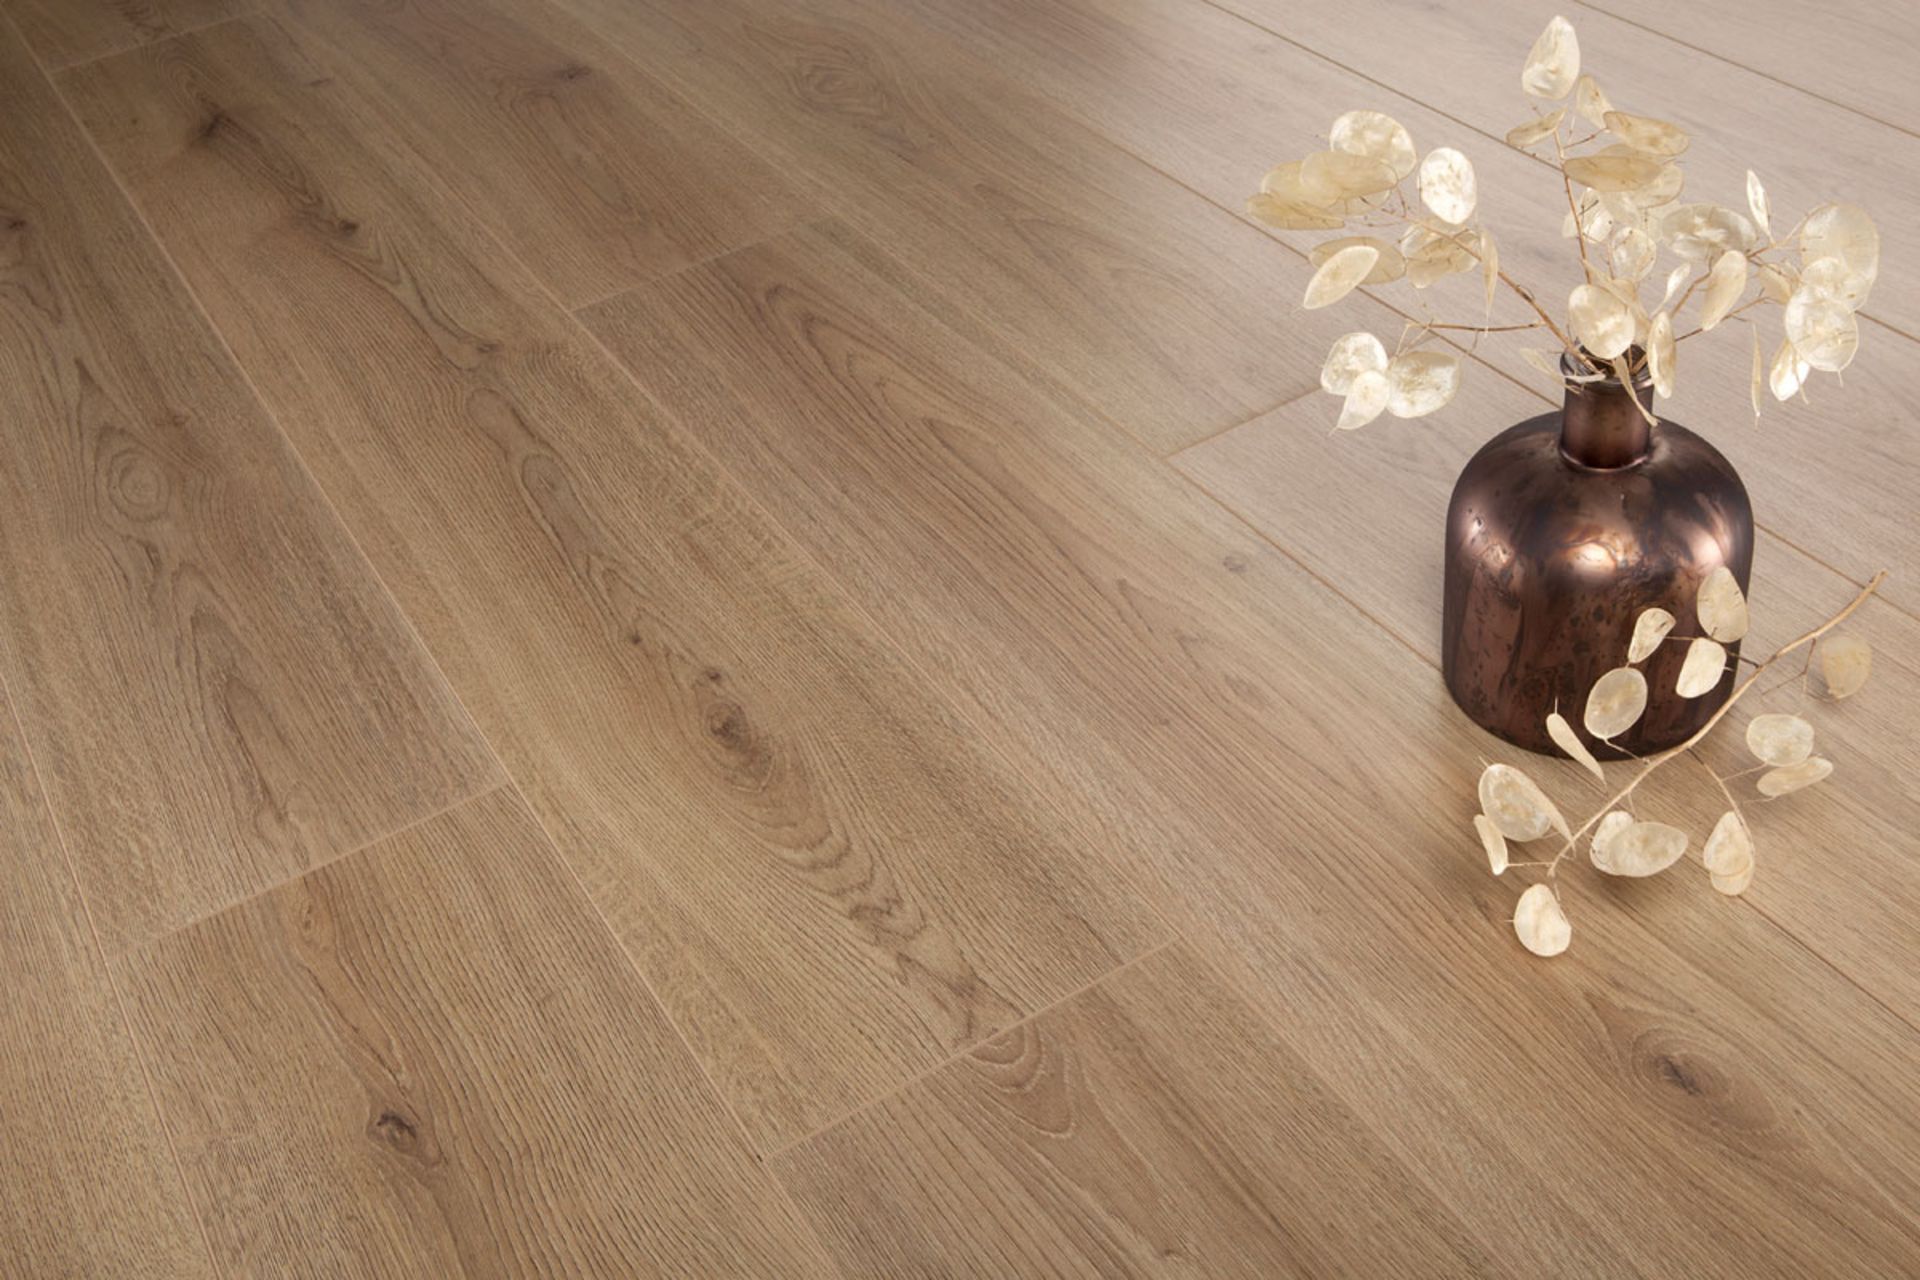 NEW 9.56 Square Meters of LAMINATE FLOORING TREND NATURE OAK. With a warm natural tone and a co...